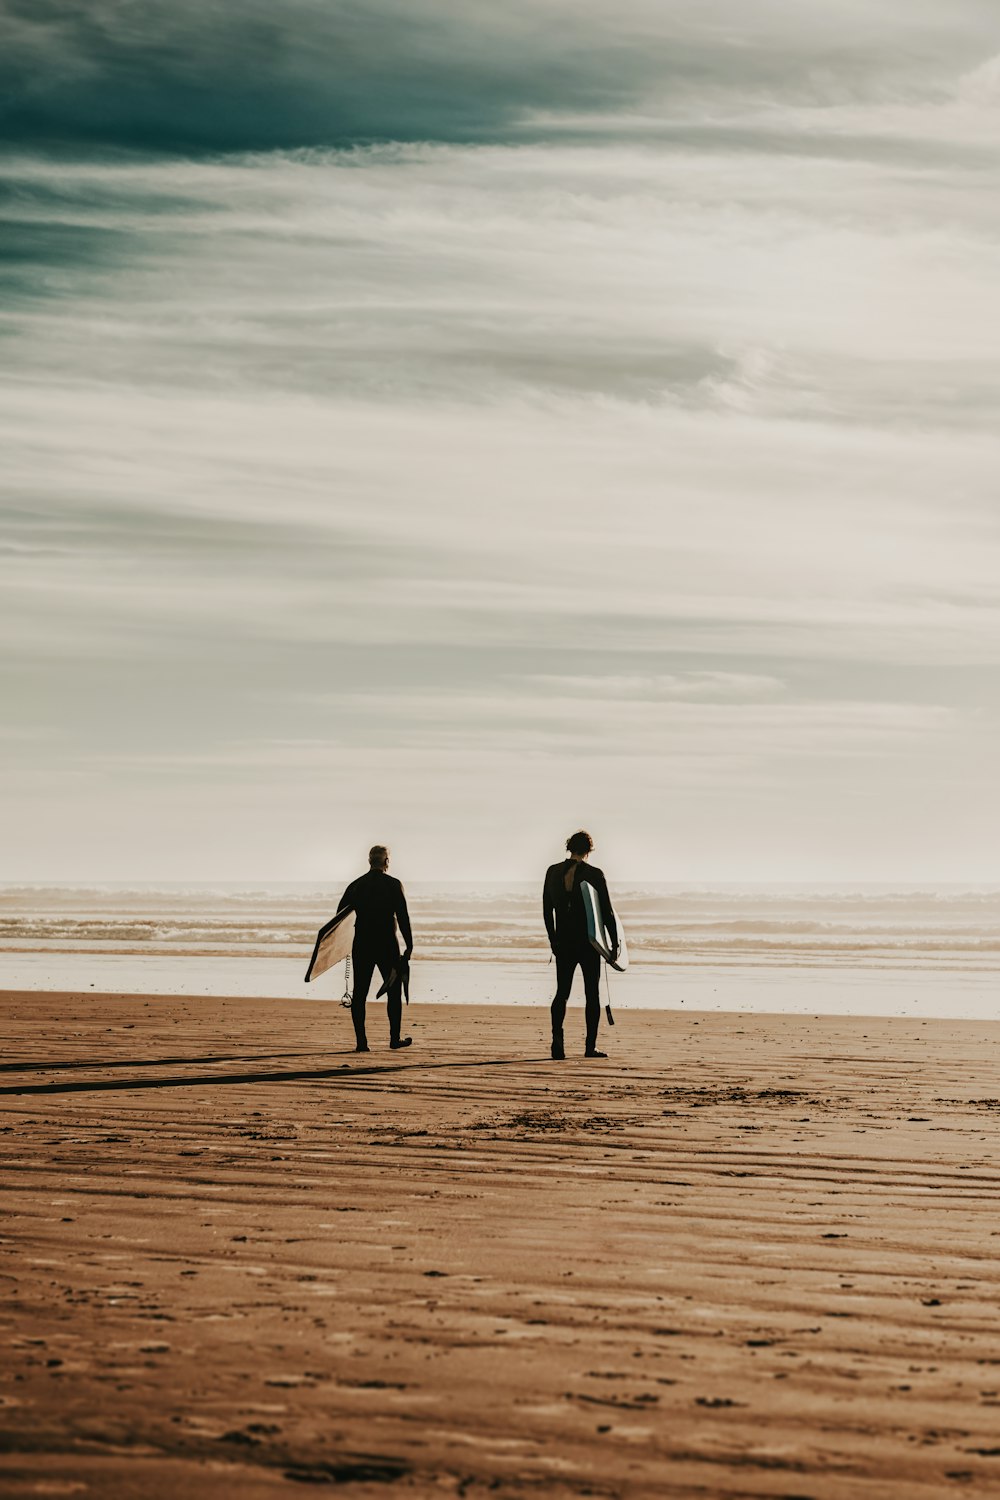 two surfers walking on the beach with their boards